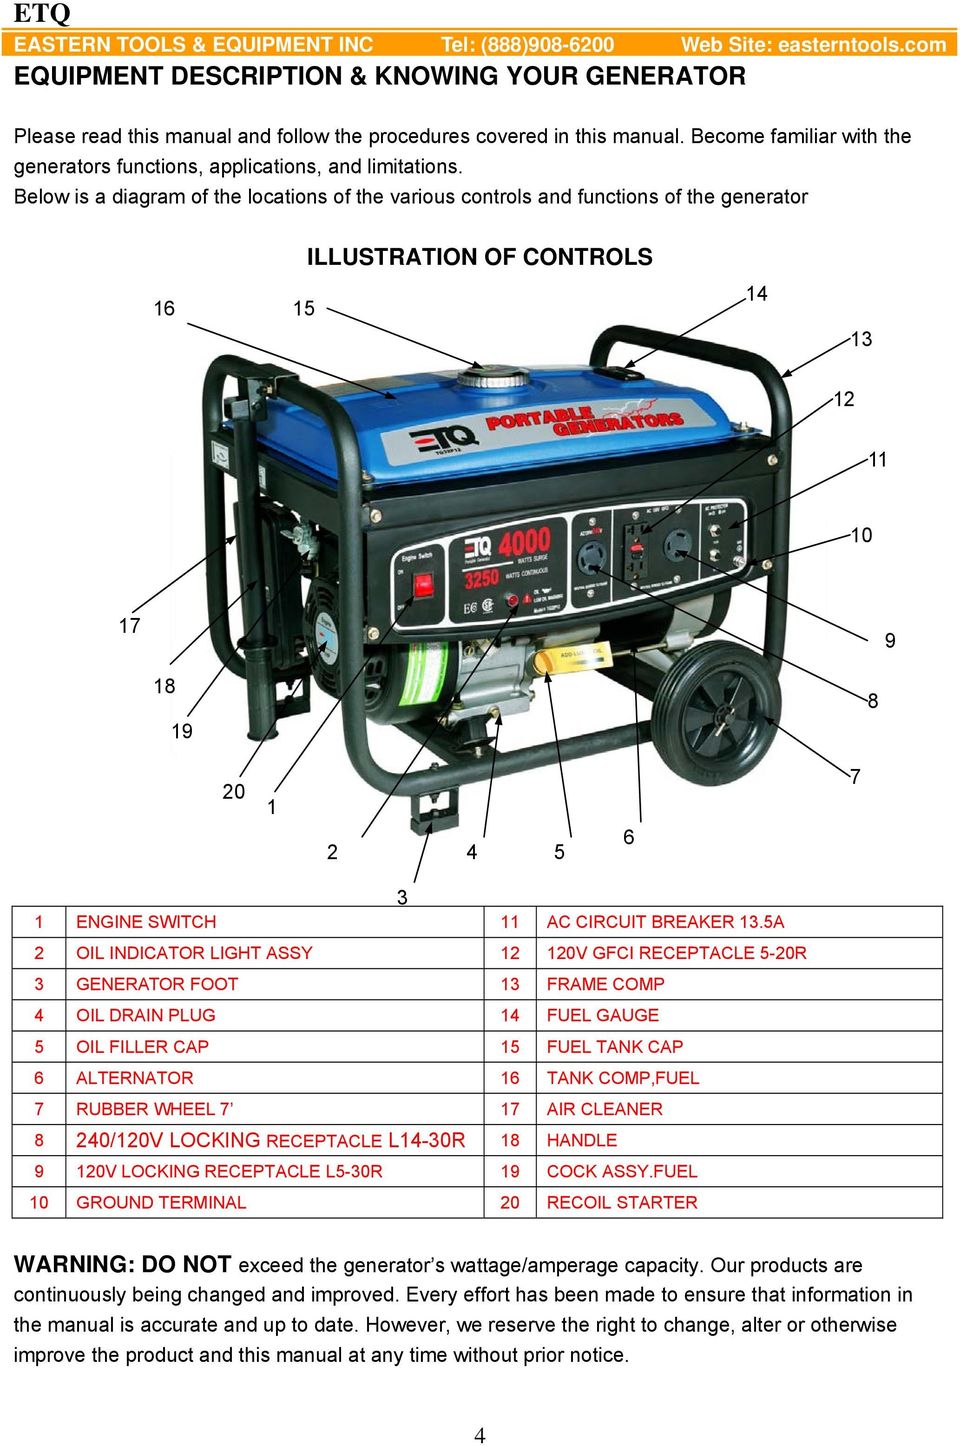 Below is a diagram of the locations of the various controls and functions of the generator ILLUSTRATION OF CONTROLS 16 15 14 13 12 11 10 17 9 18 19 8 20 1 2 4 5 6 7 3 1 ENGINE SWITCH 11 AC CIRCUIT